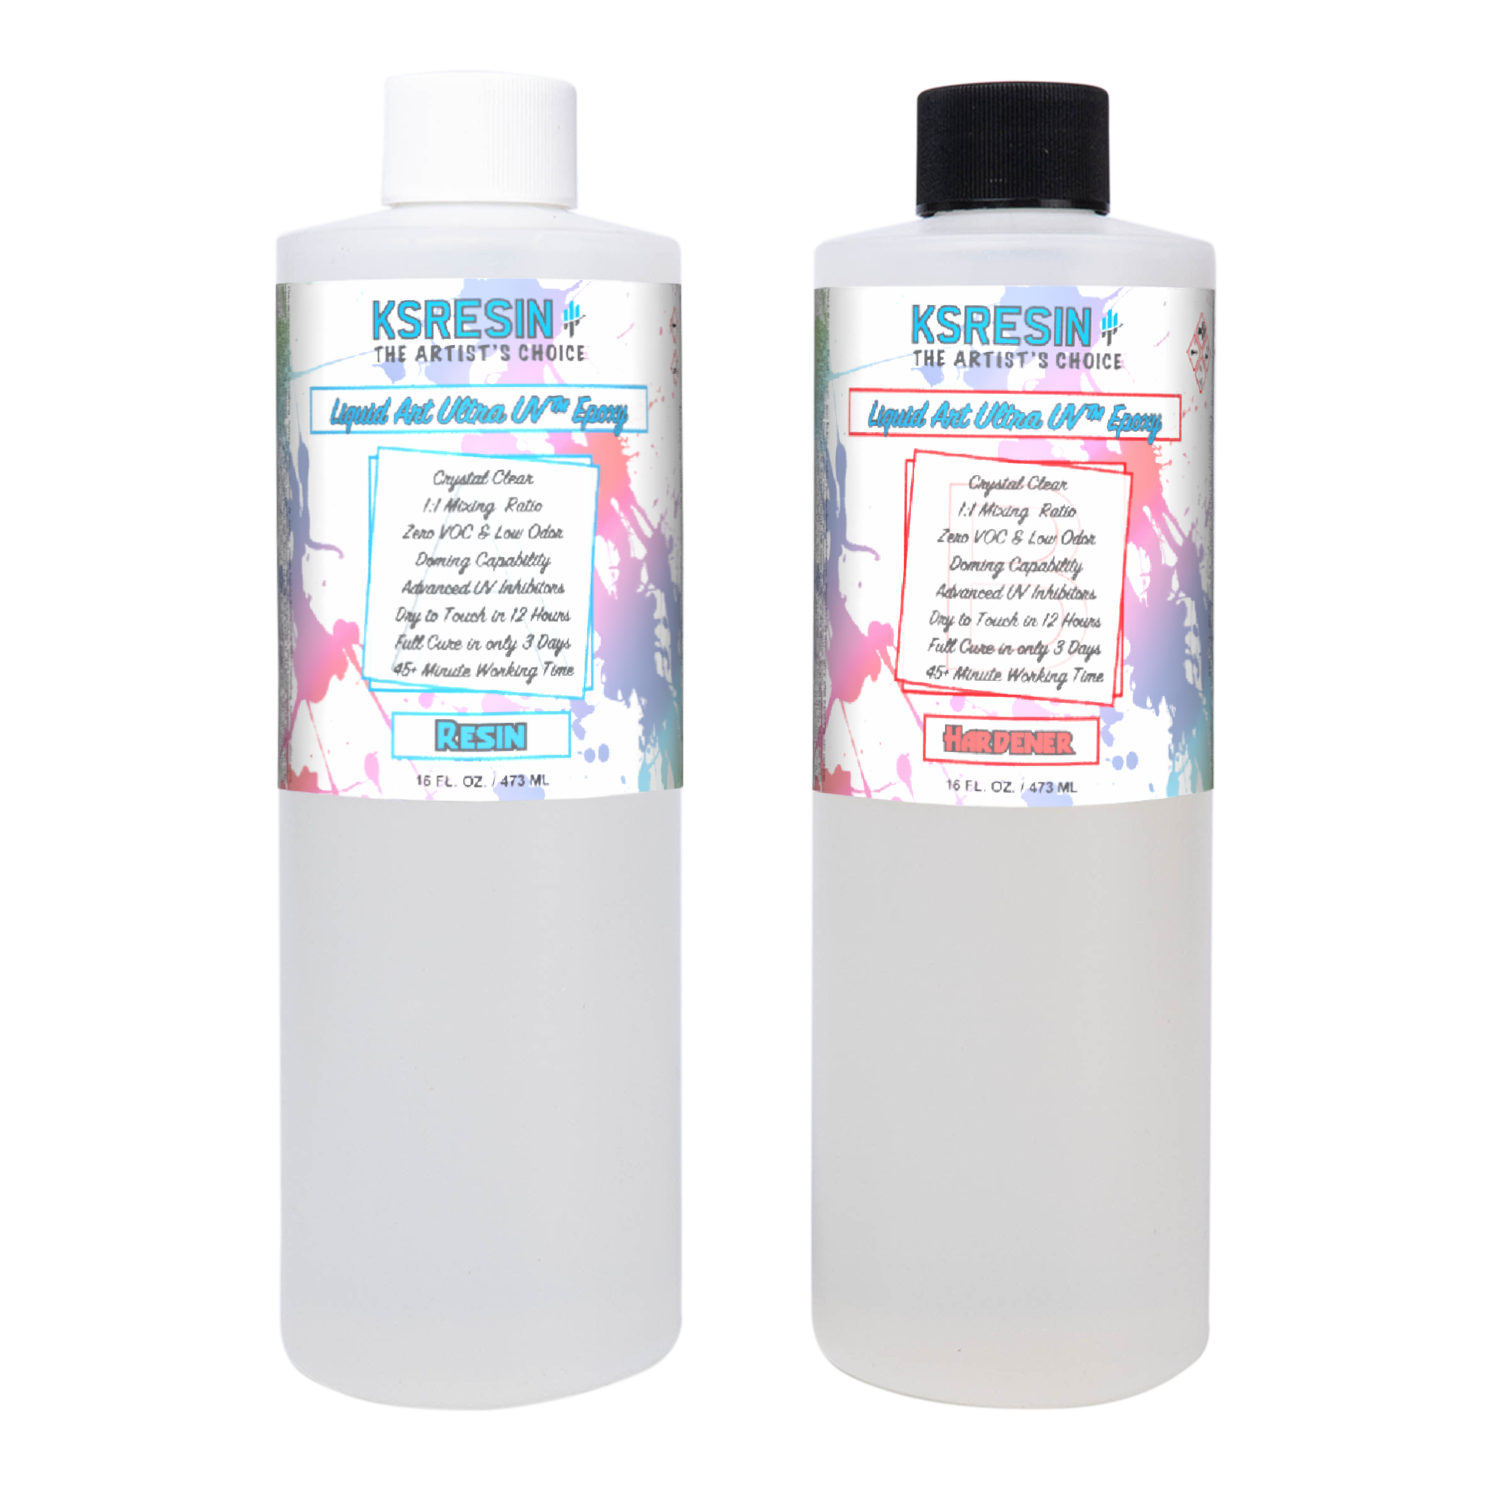 Liquid Art Clear Artist Epoxy Resin | Self-Leveling, High-Gloss, Crystal Clear Art Resin | for Tumblers, Canvas, Wood, and Other DIY Projects (1